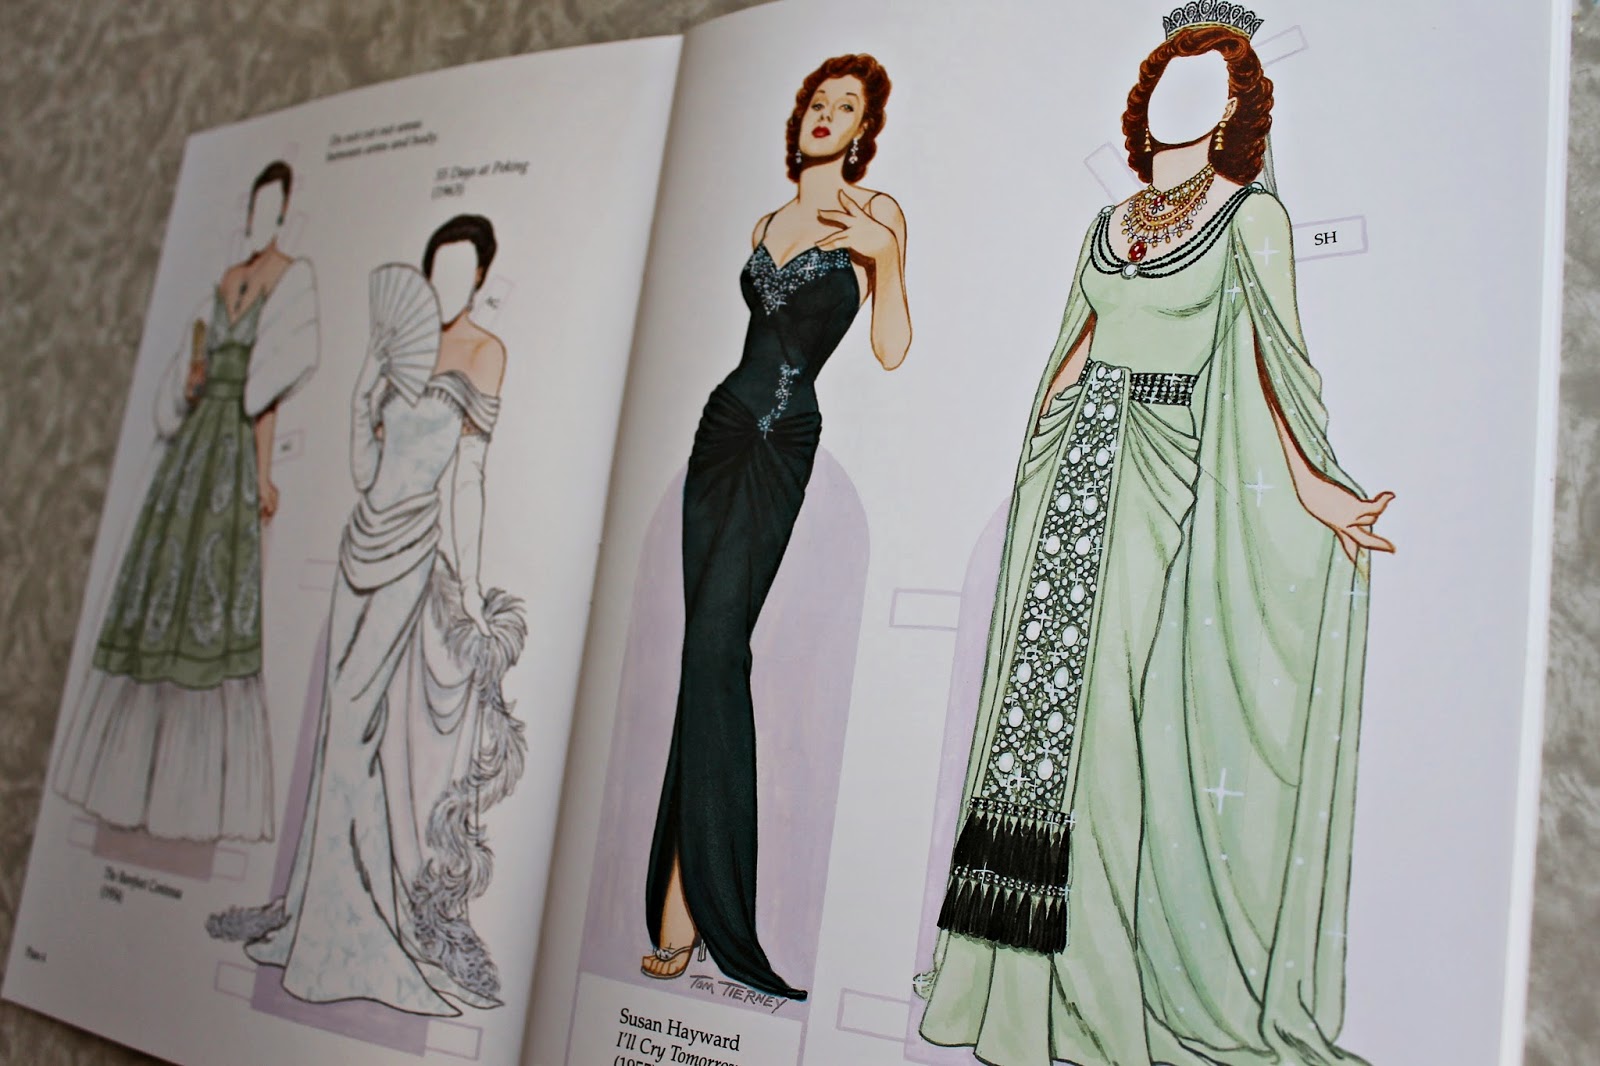 Glamorous Movie Stars of the 1950s paper dolls by Tom Tierney from Dover Publications